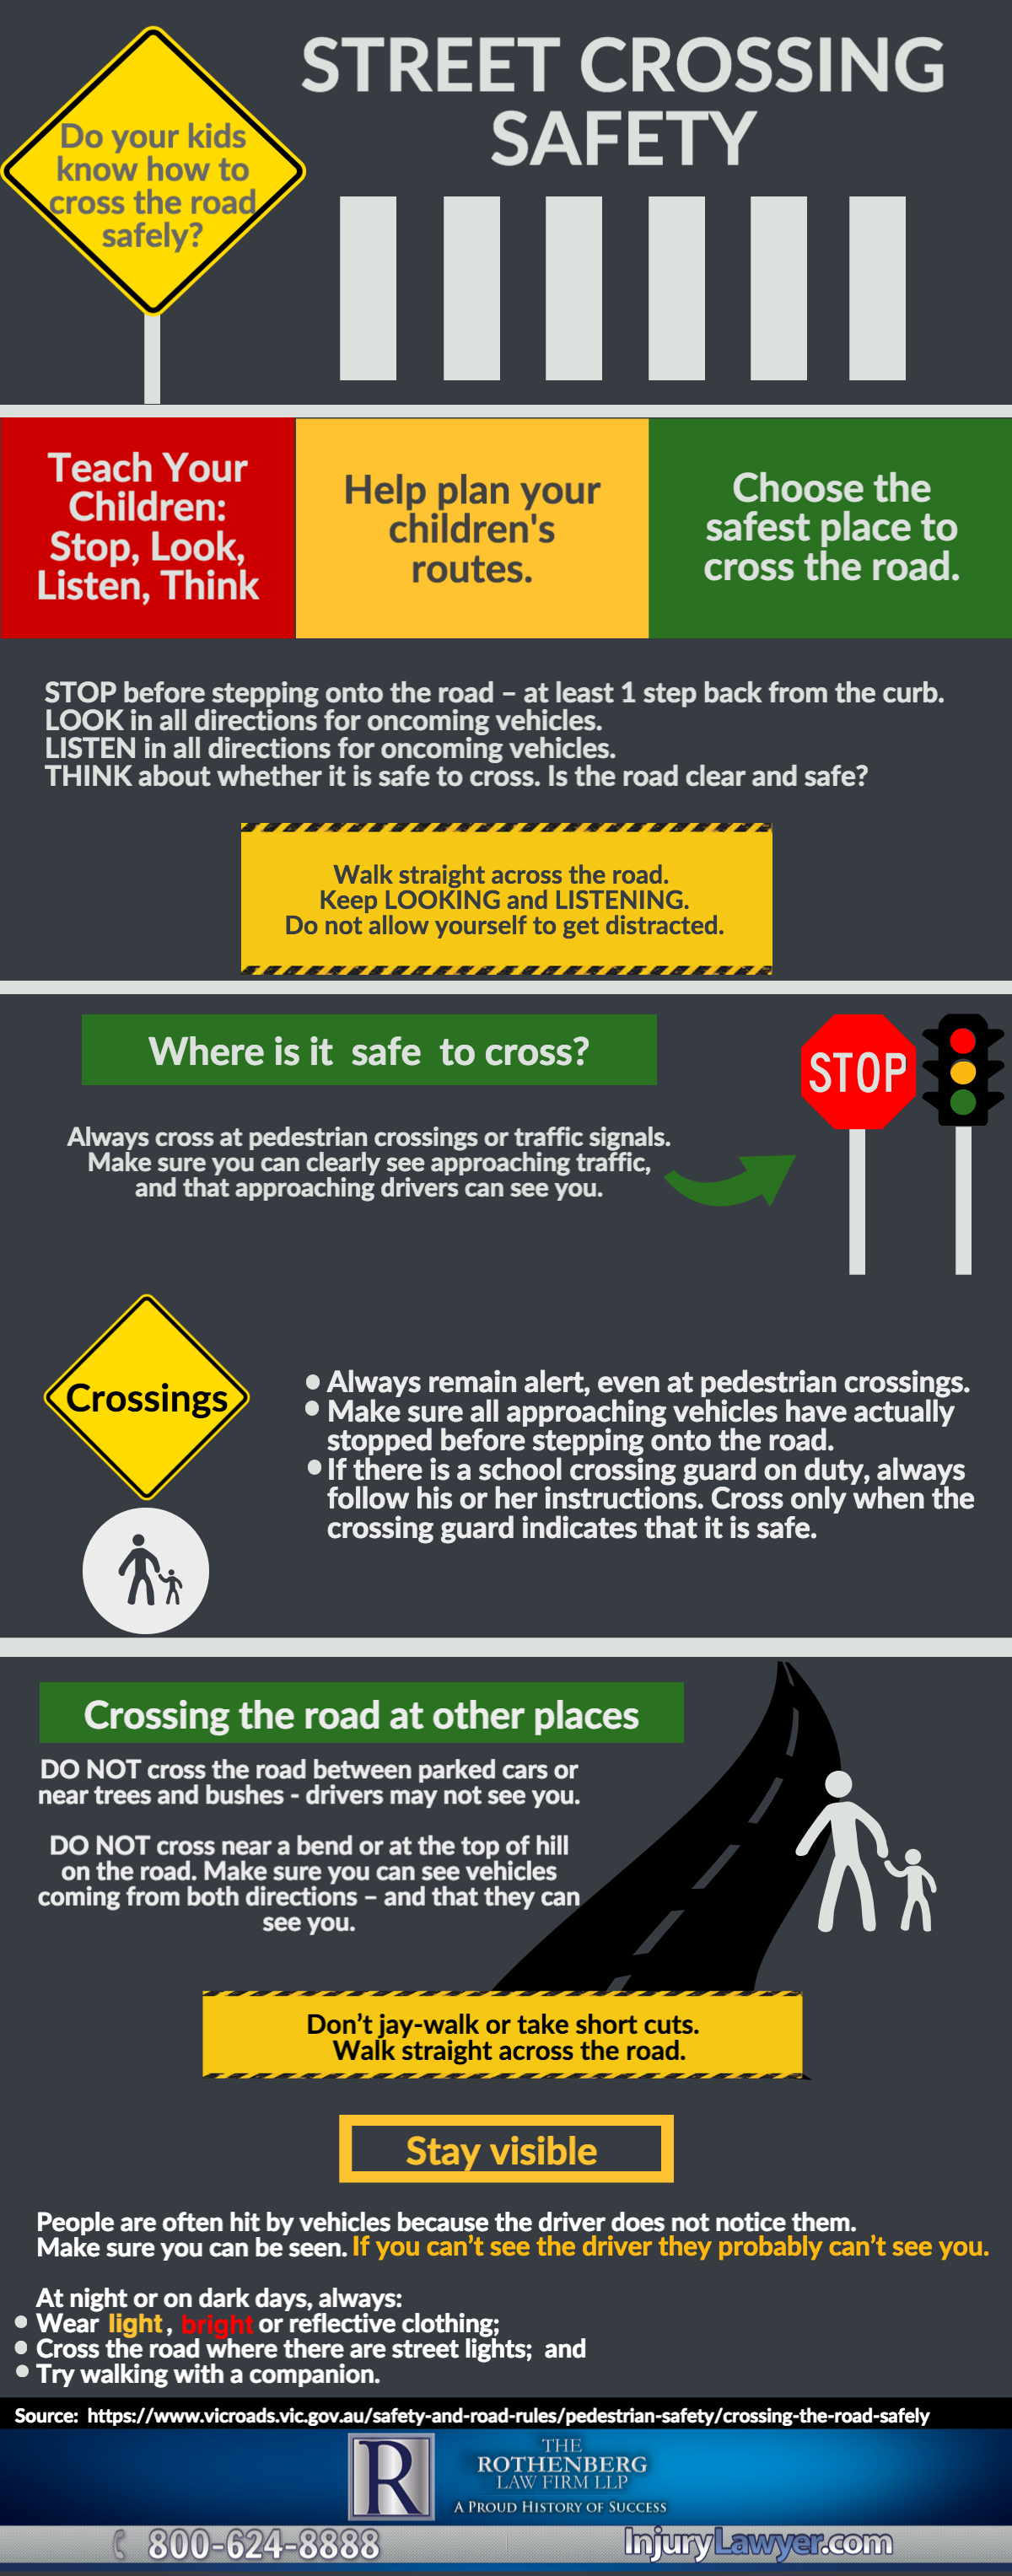 Street Crossing Safety Infographic - The Rothenberg Law Firm LLP